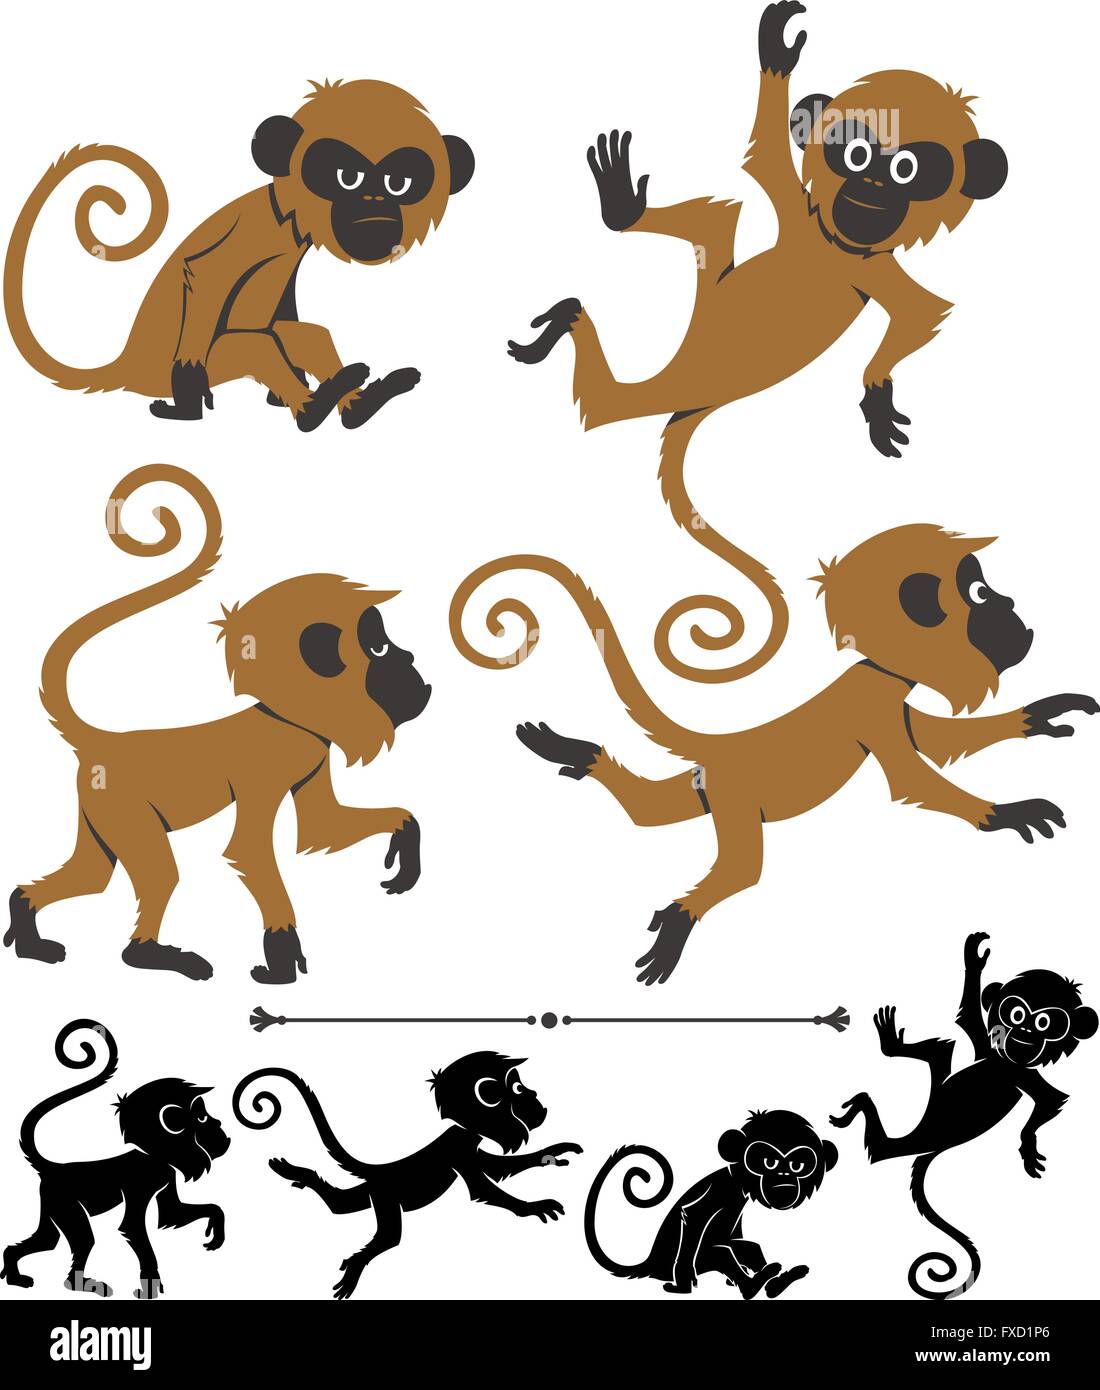 Cartoon monkey in 4 different poses. Below are silhouette versions of the same poses. Stock Vector